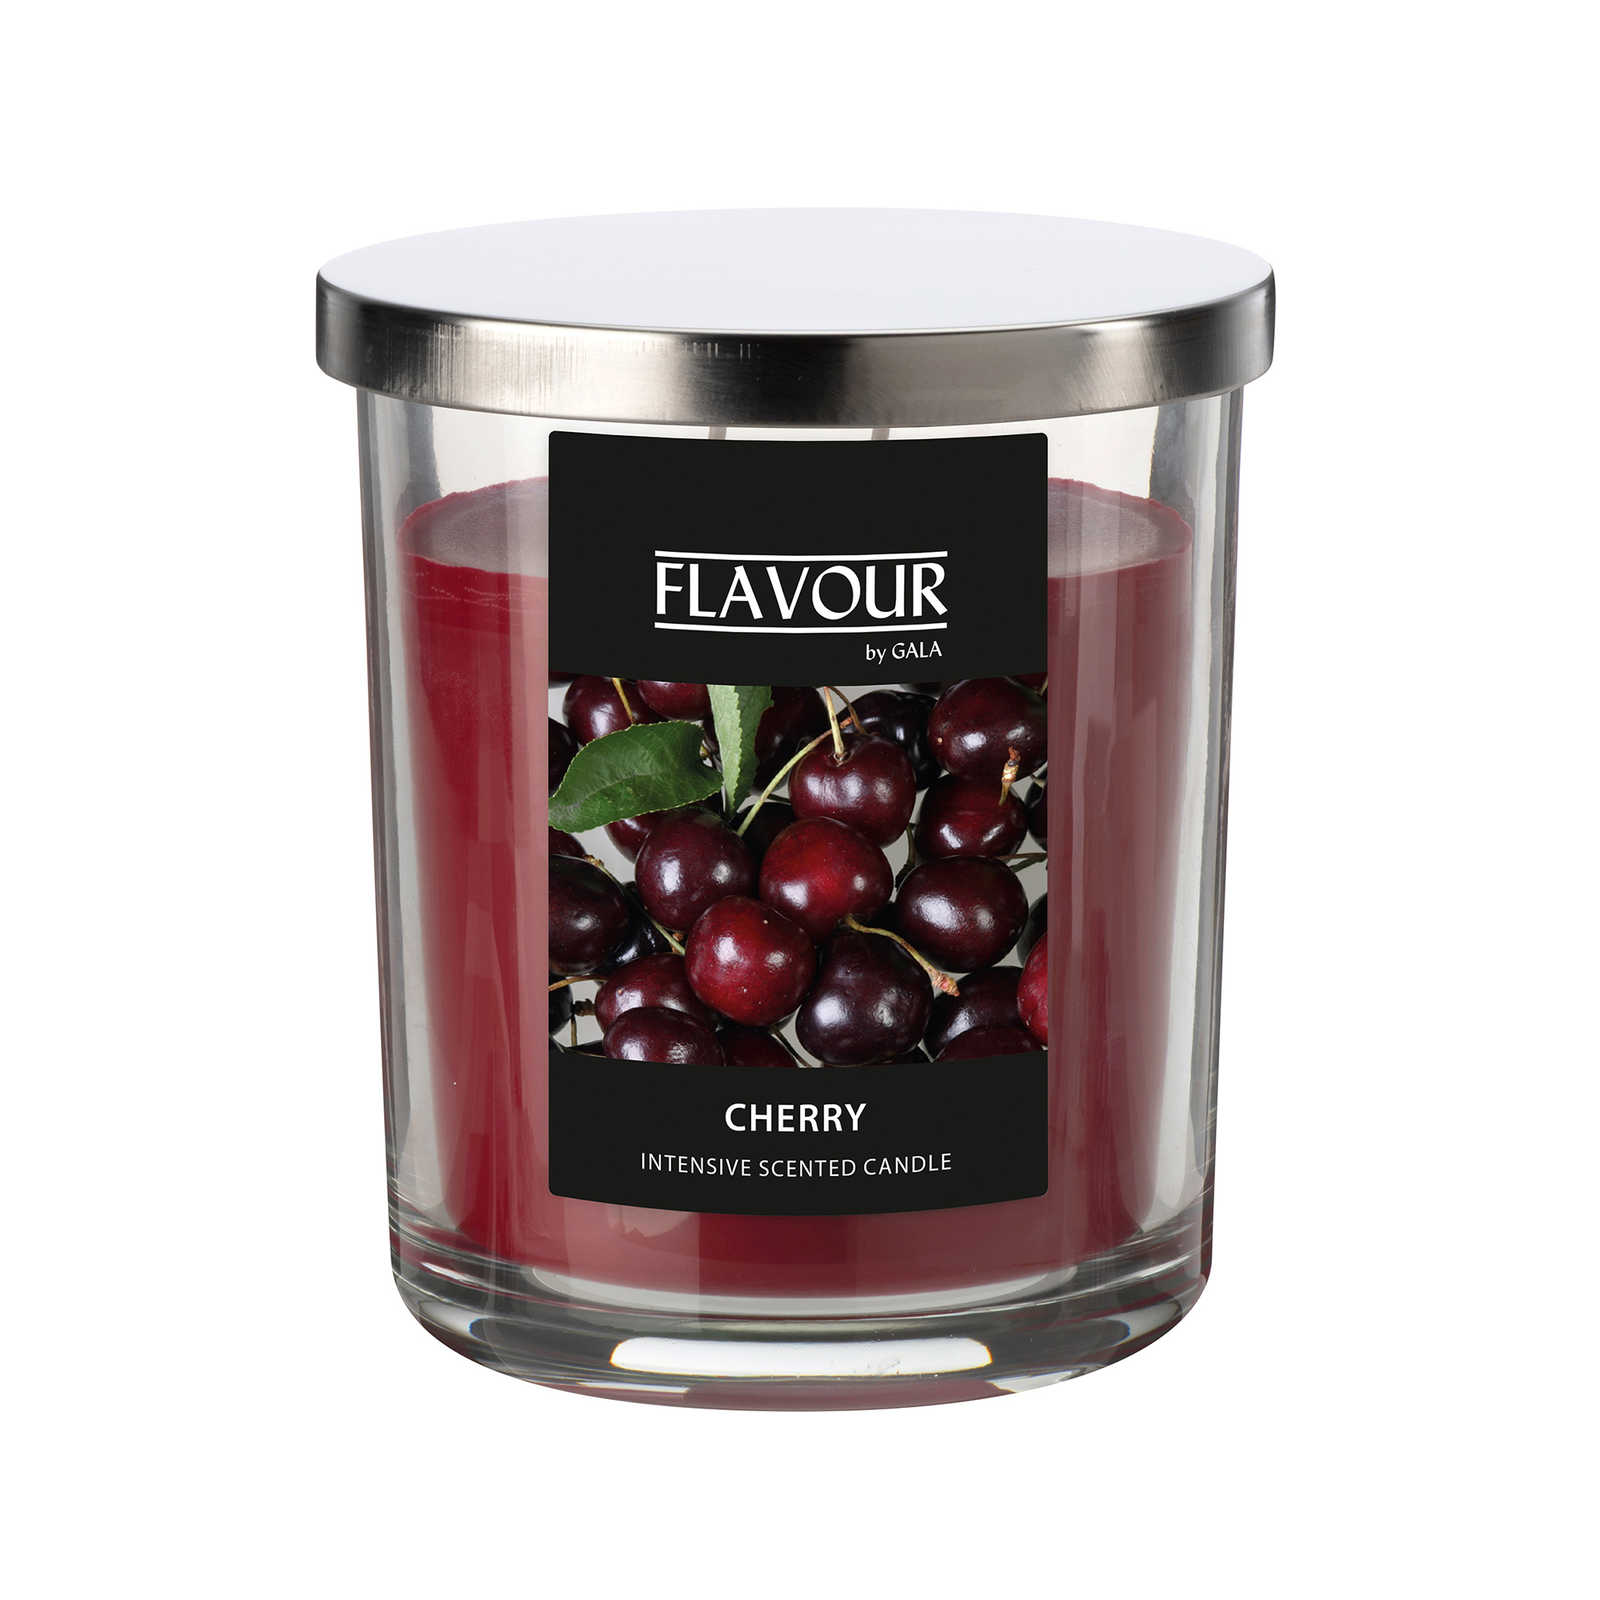         Cherry scented candle with fruity fragrance - 380g
    